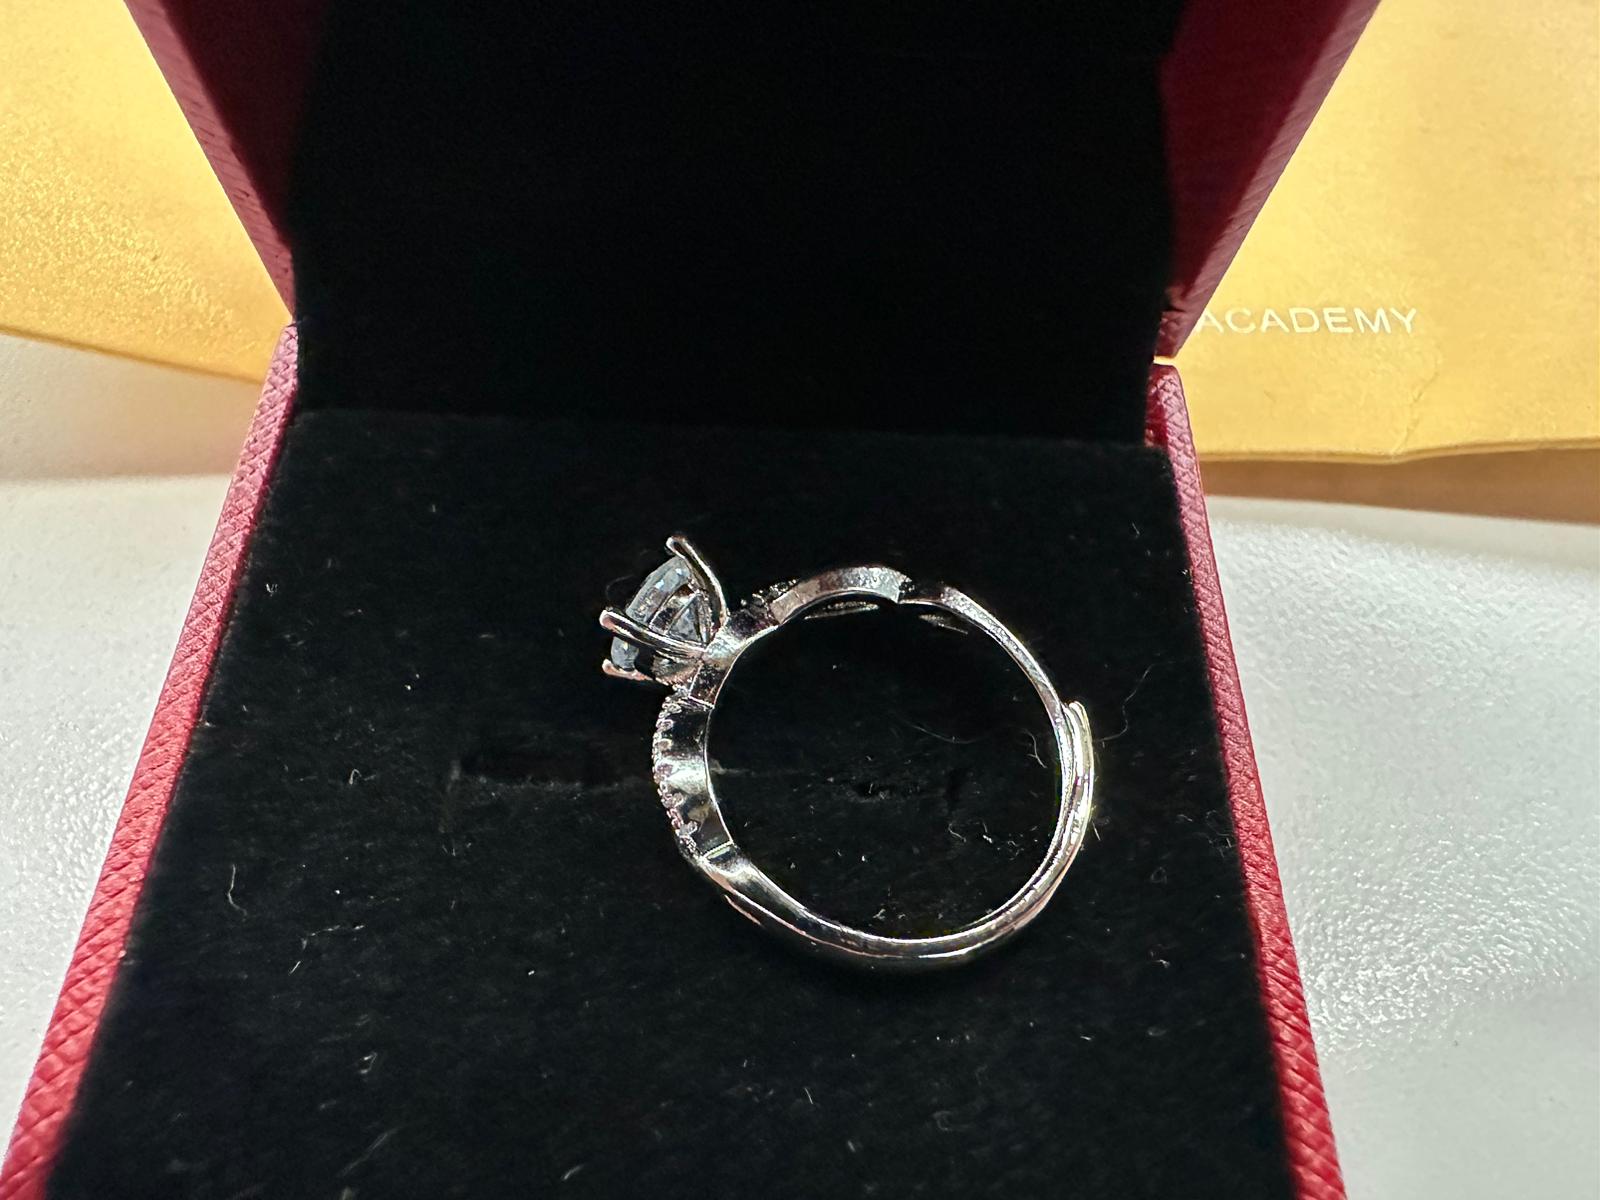 The ring that arrived unsolicited to a girl's dwelling